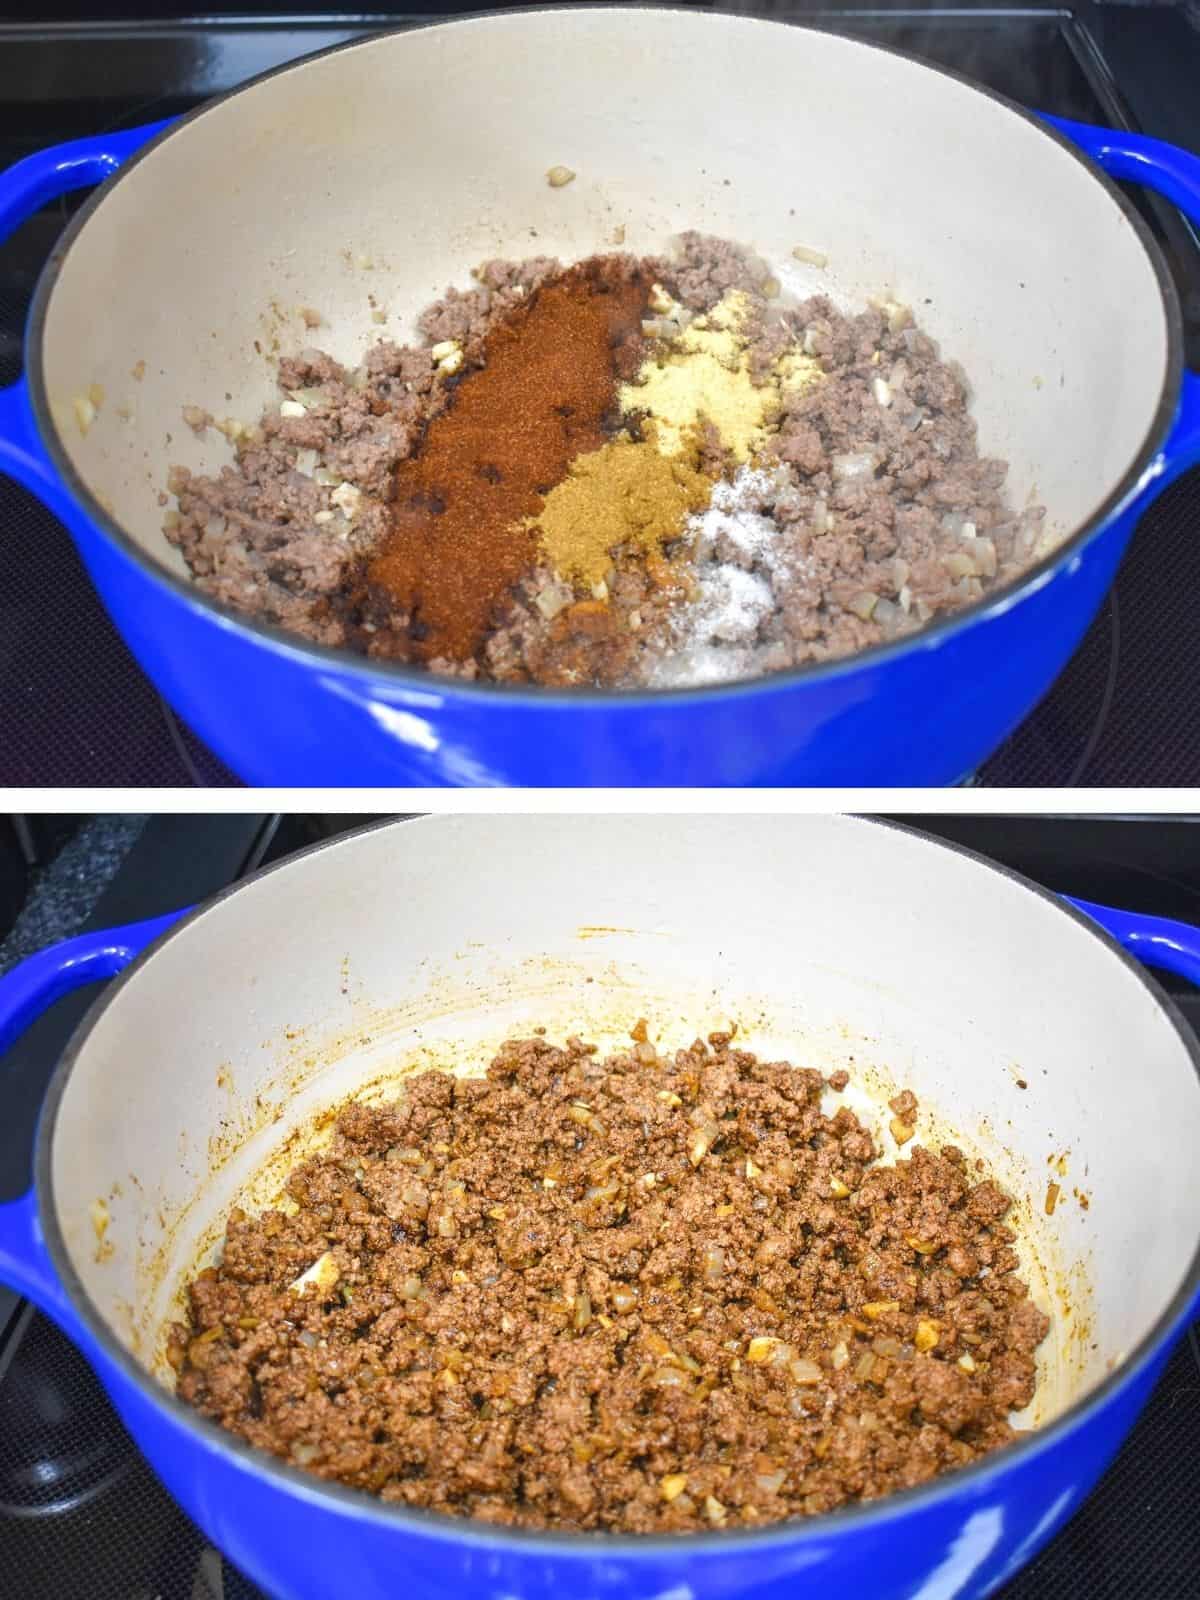 Two images showing the spices added to the browned ground beef, and combined in a large blue pot.